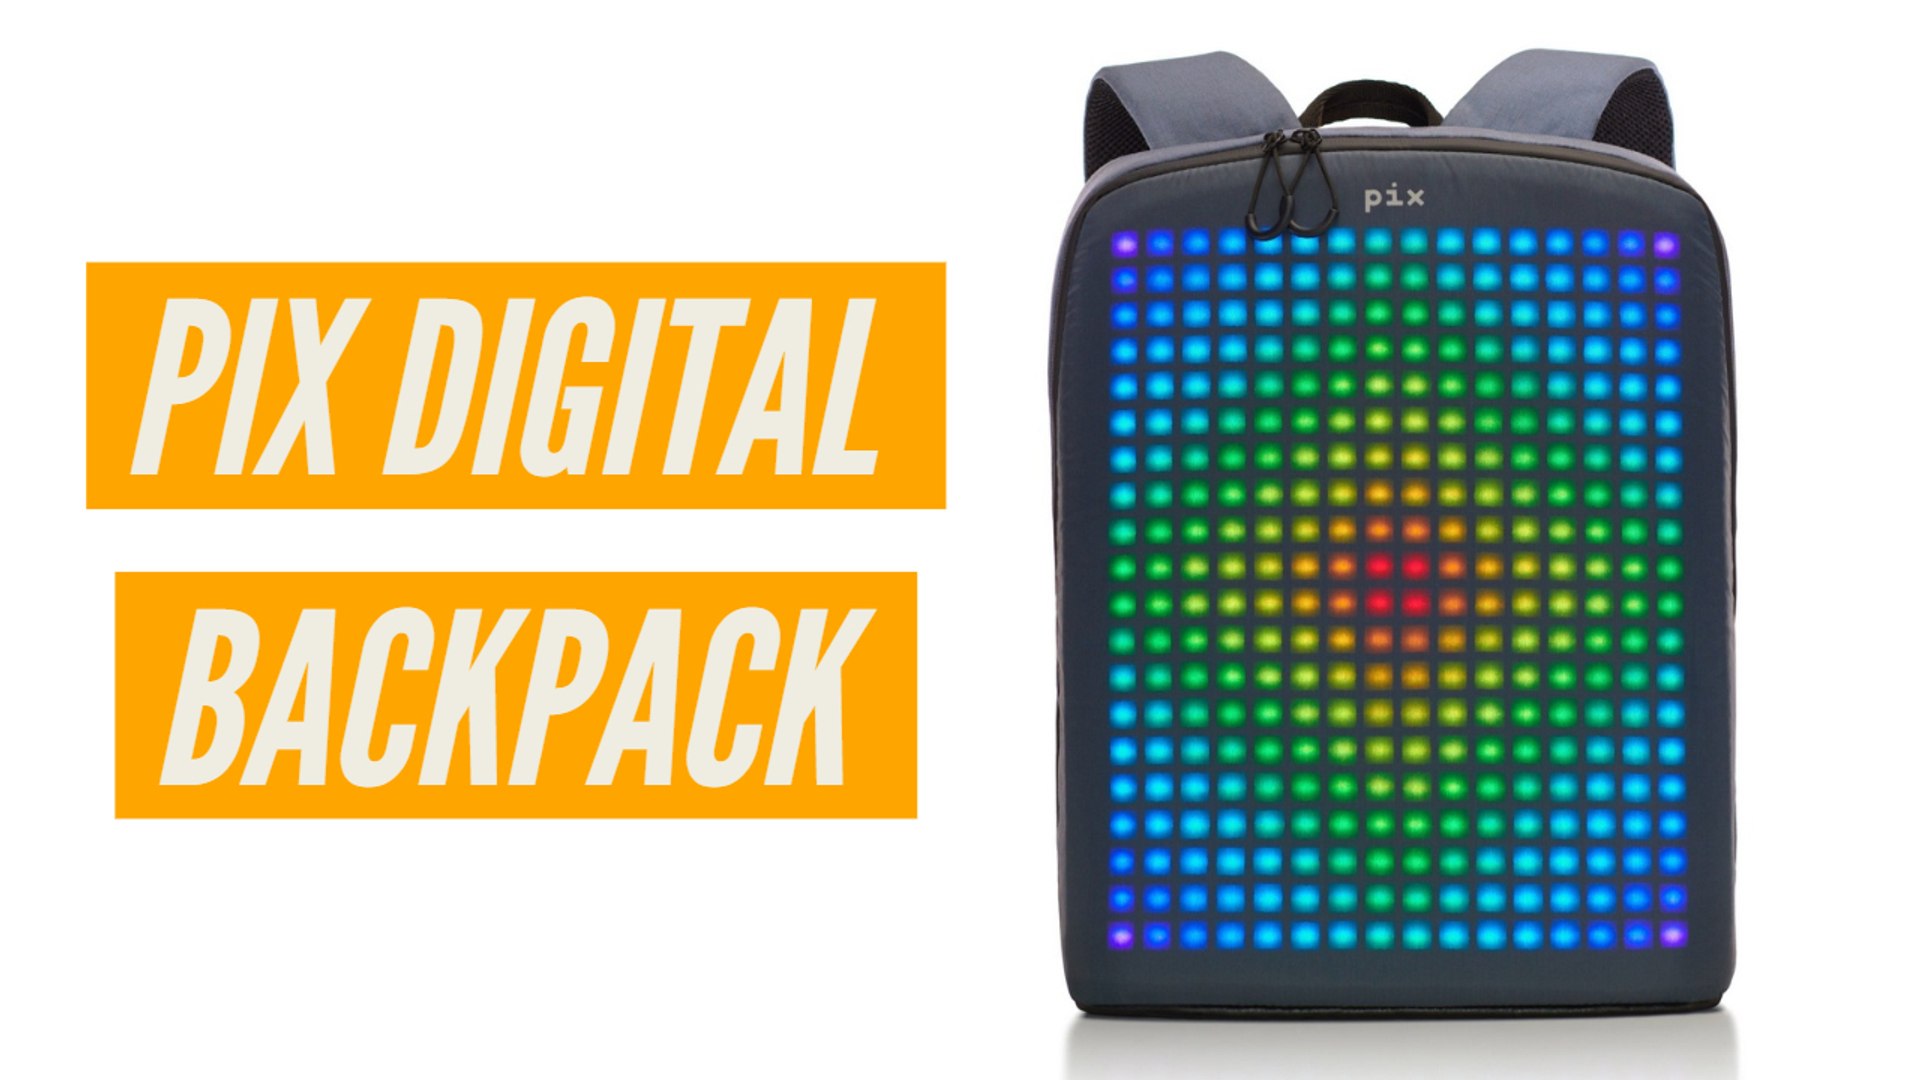 Pix Digital Backpack First Look | CES 2019 - video Dailymotion